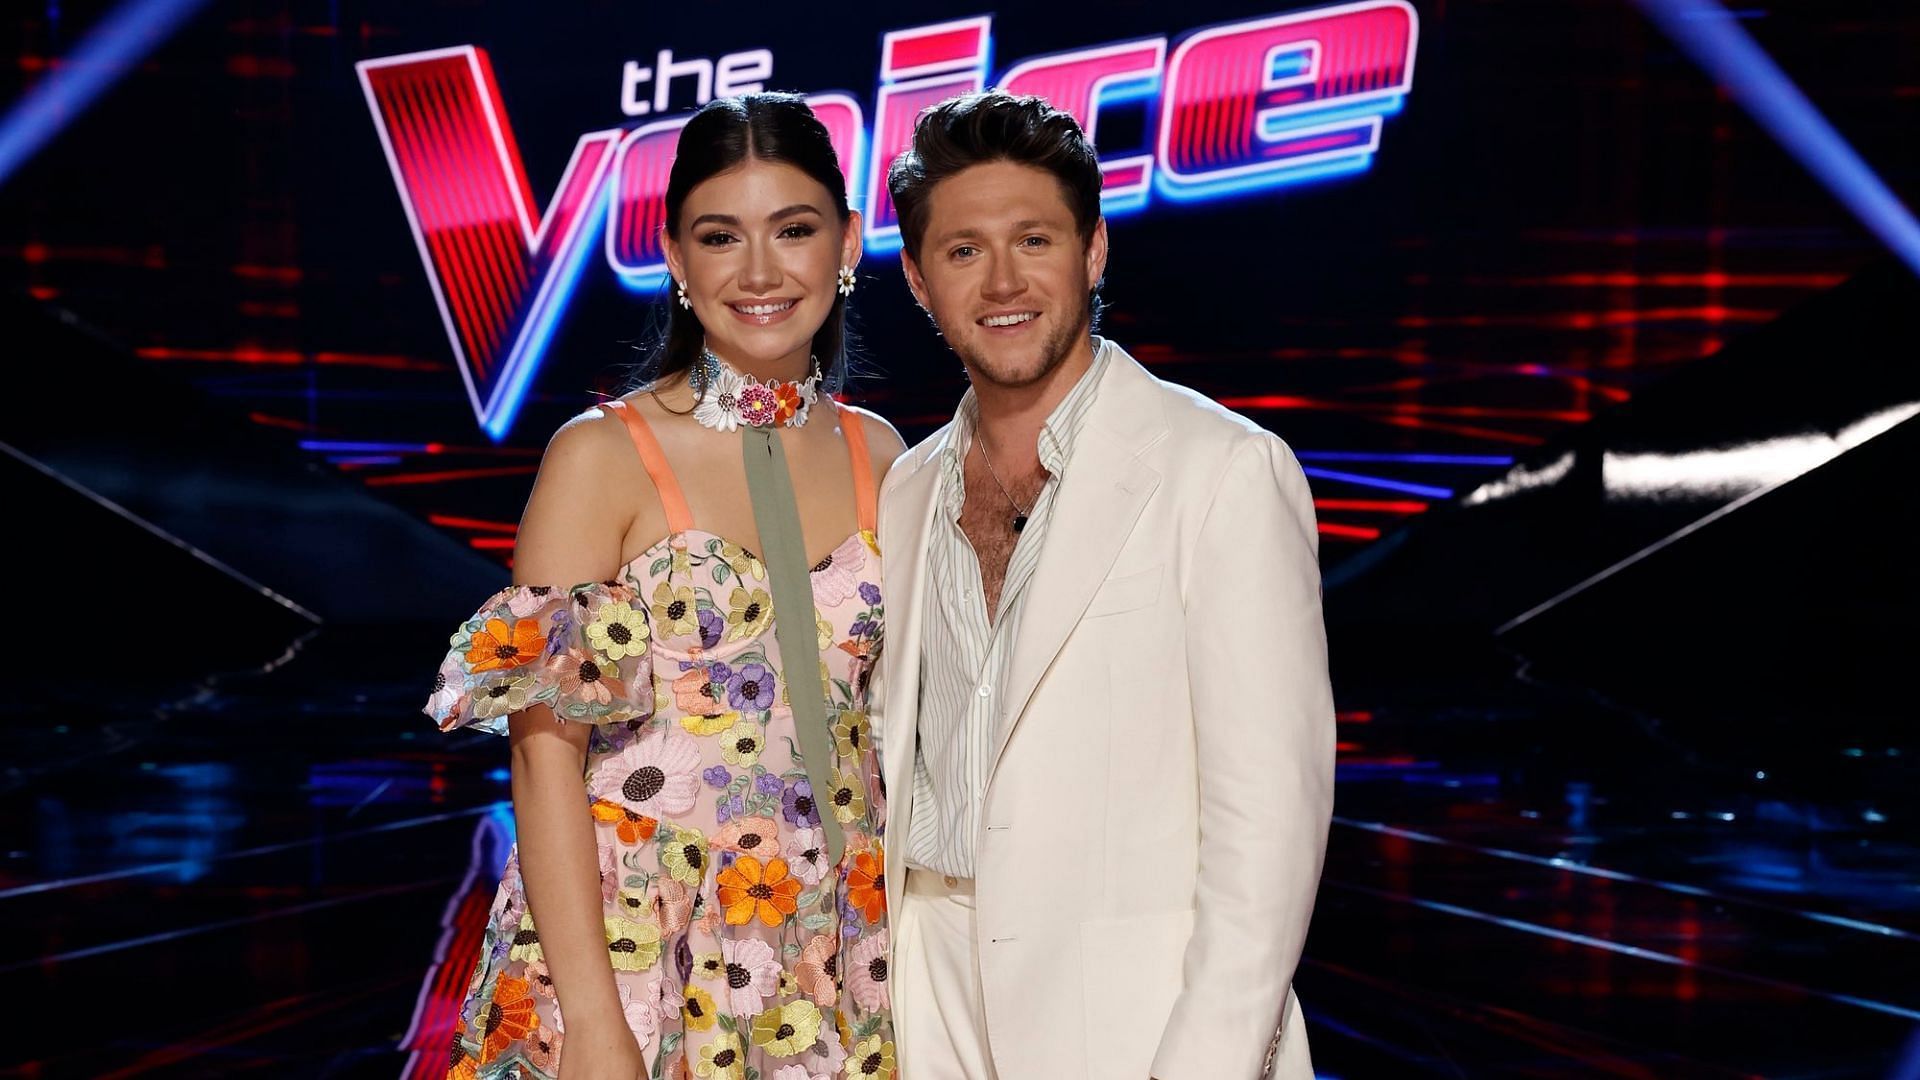 Gina Miles from Team Niall wins The Voice season 23